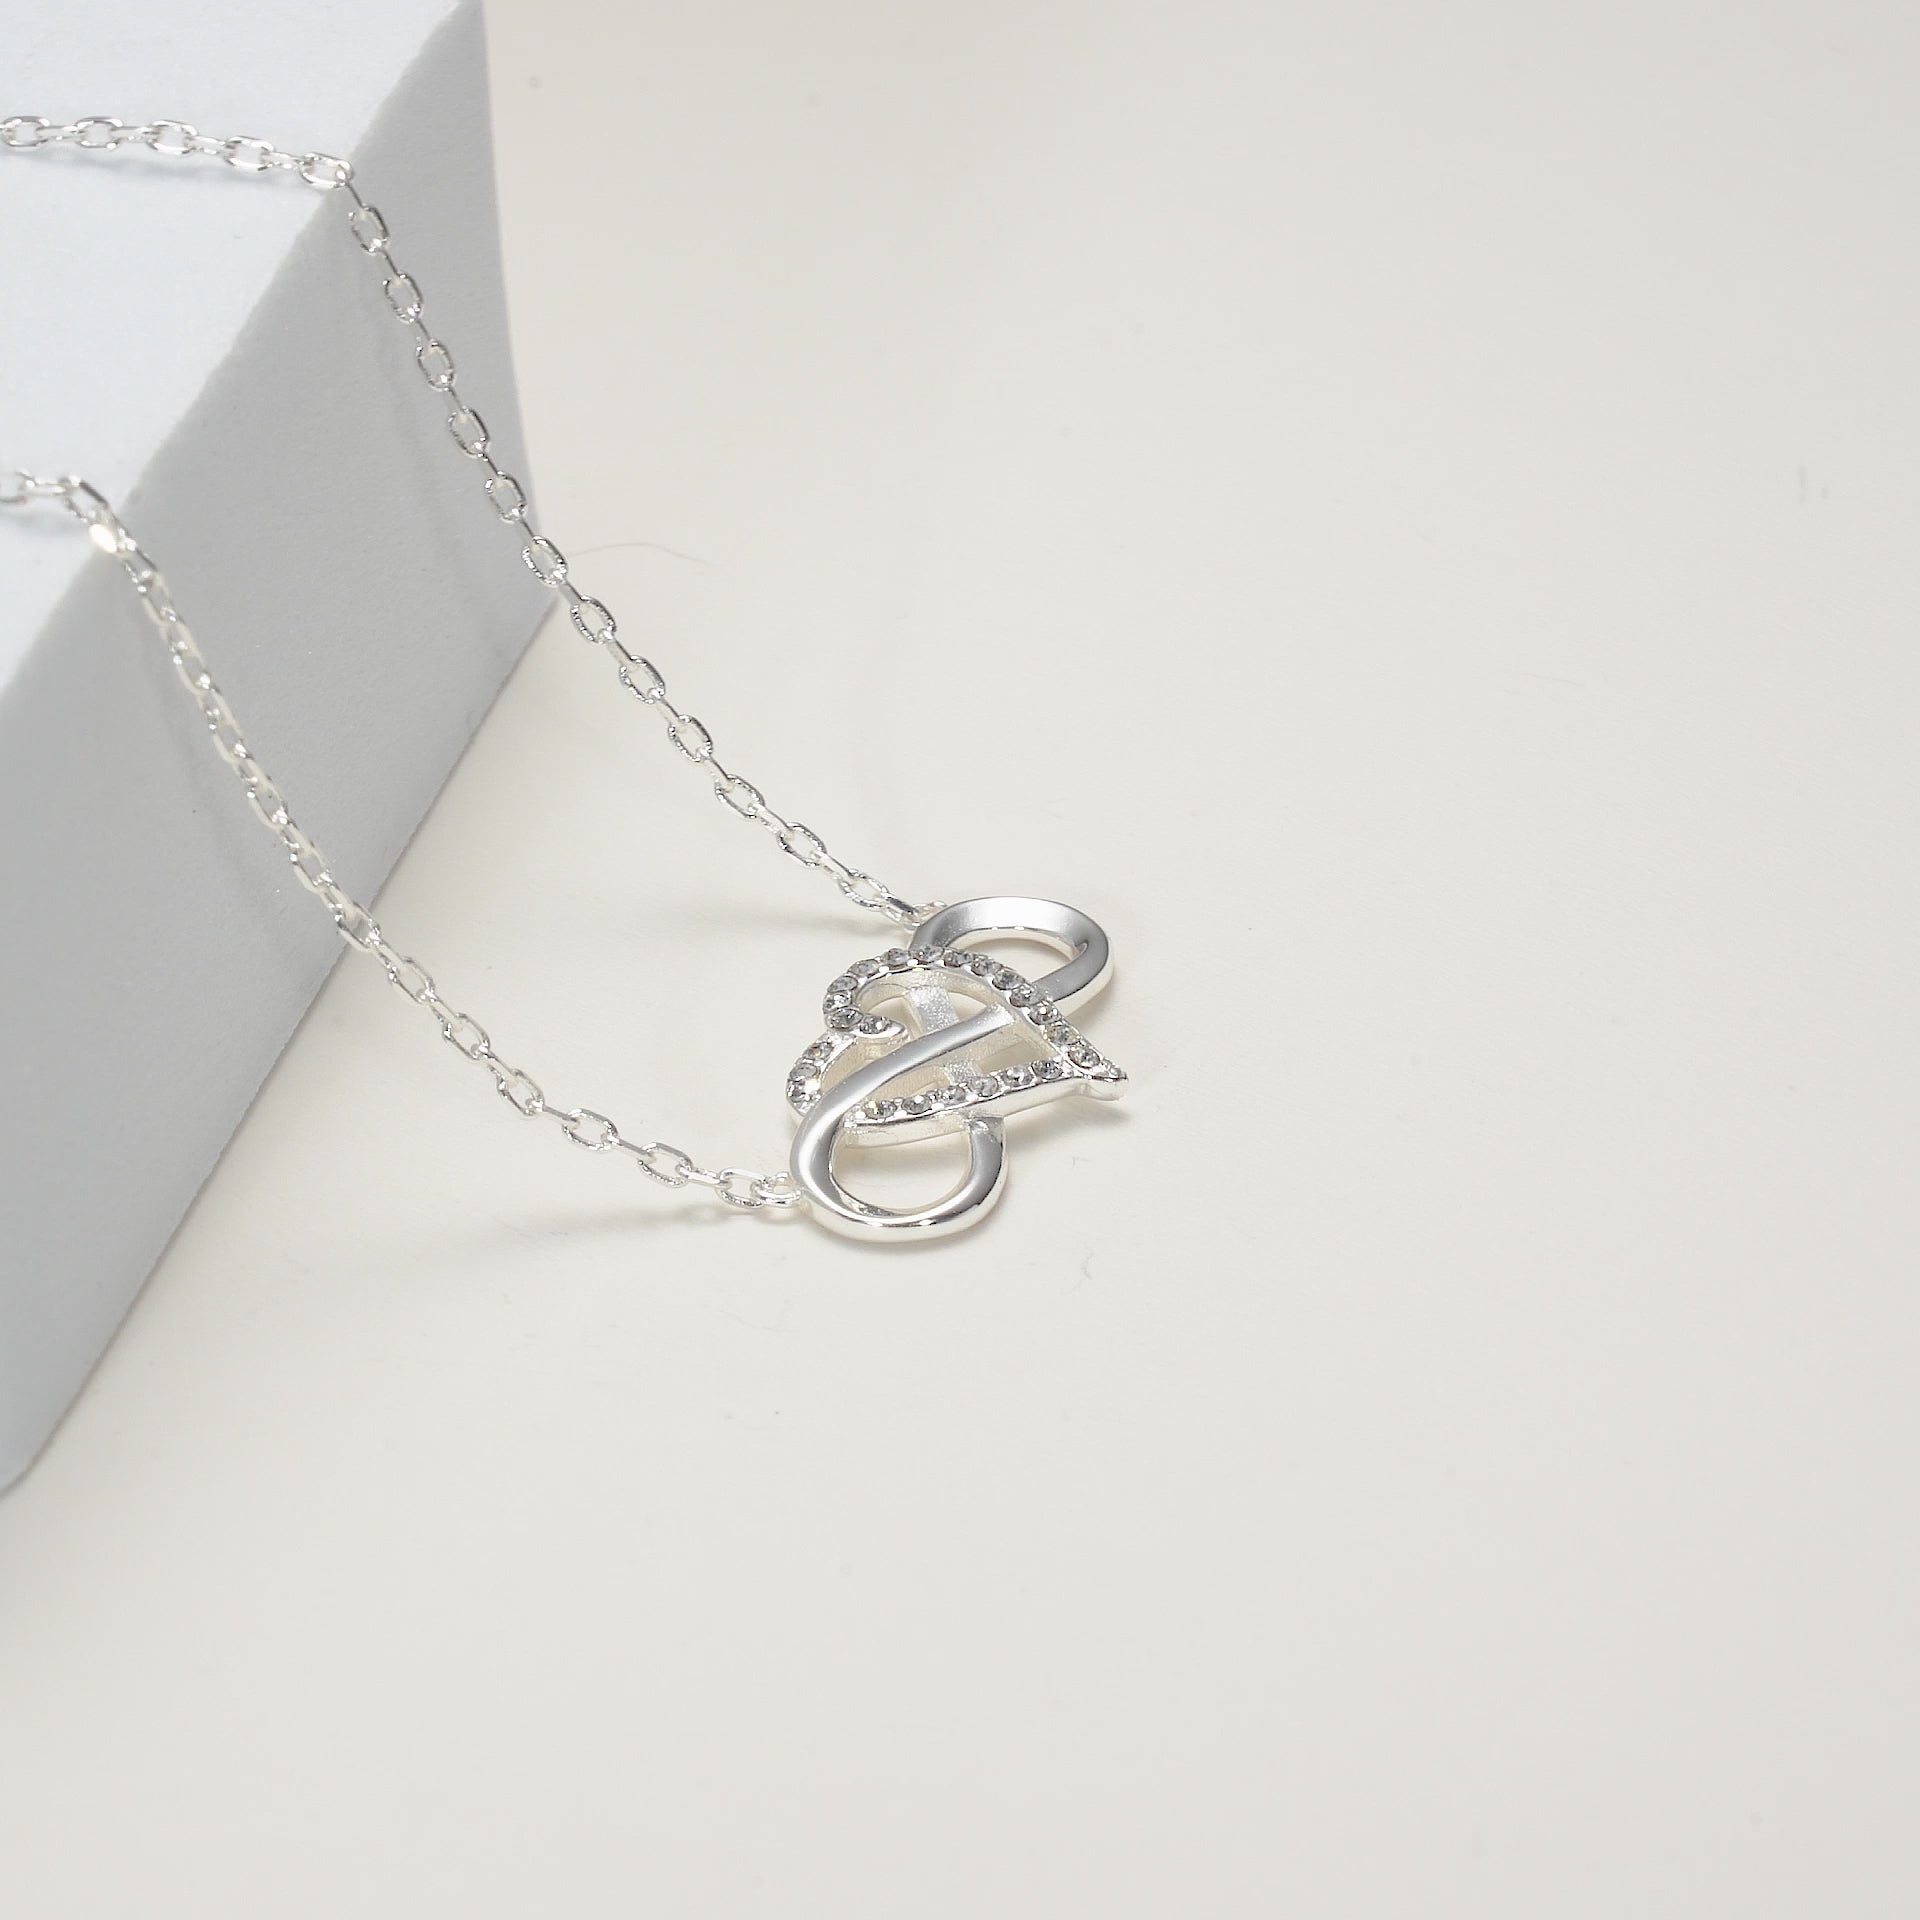 Silver Plated Infinity Heart Necklace Created with Zircondia® Crystals Video